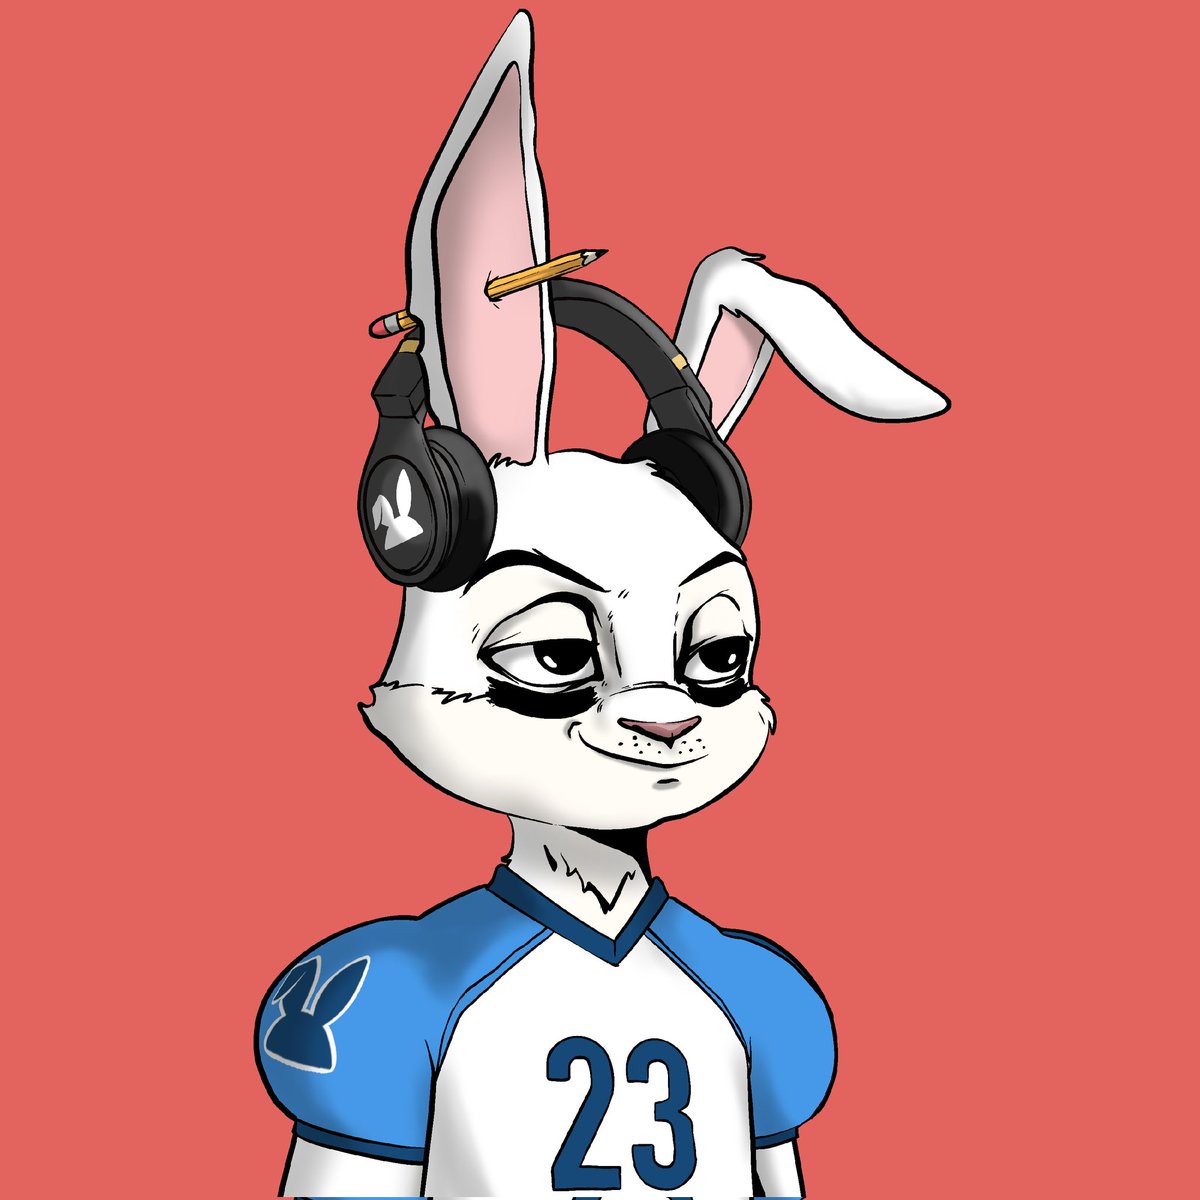 Football Season is ON 🏈

#VibesBunnies 🐰
#Cardano #NFT #Football #NFL 

Tell us what team will surprise everyone this year? 👇